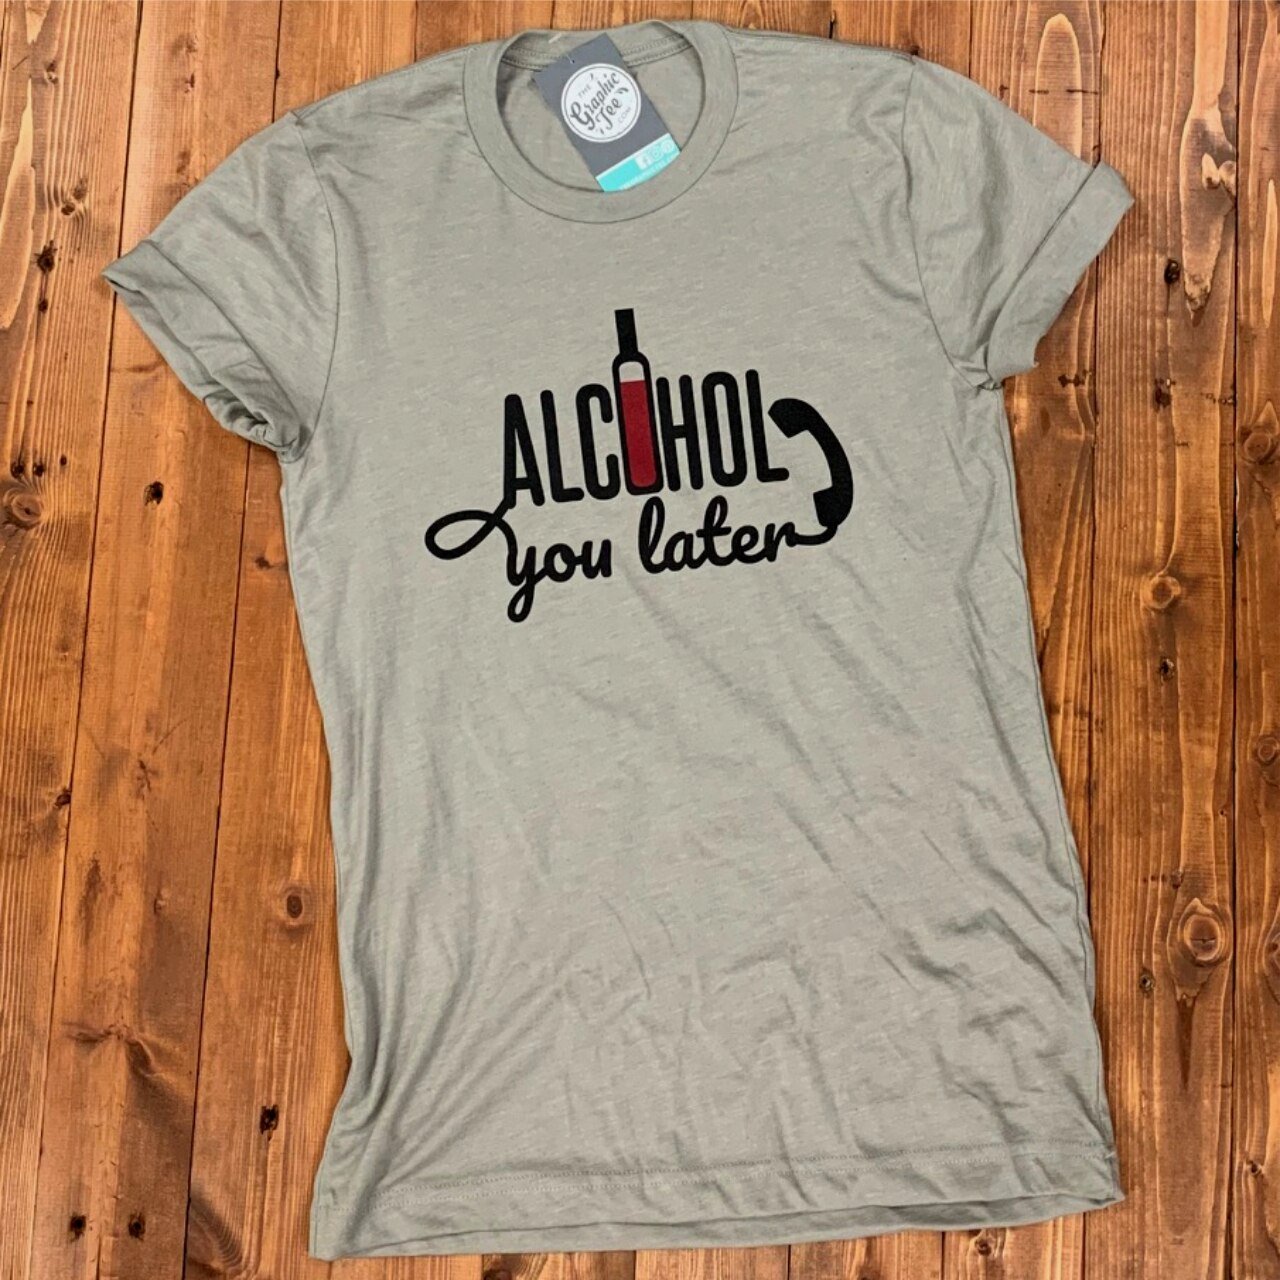 Alcohol You Later - Heather Stone Tee - The Graphic Tee